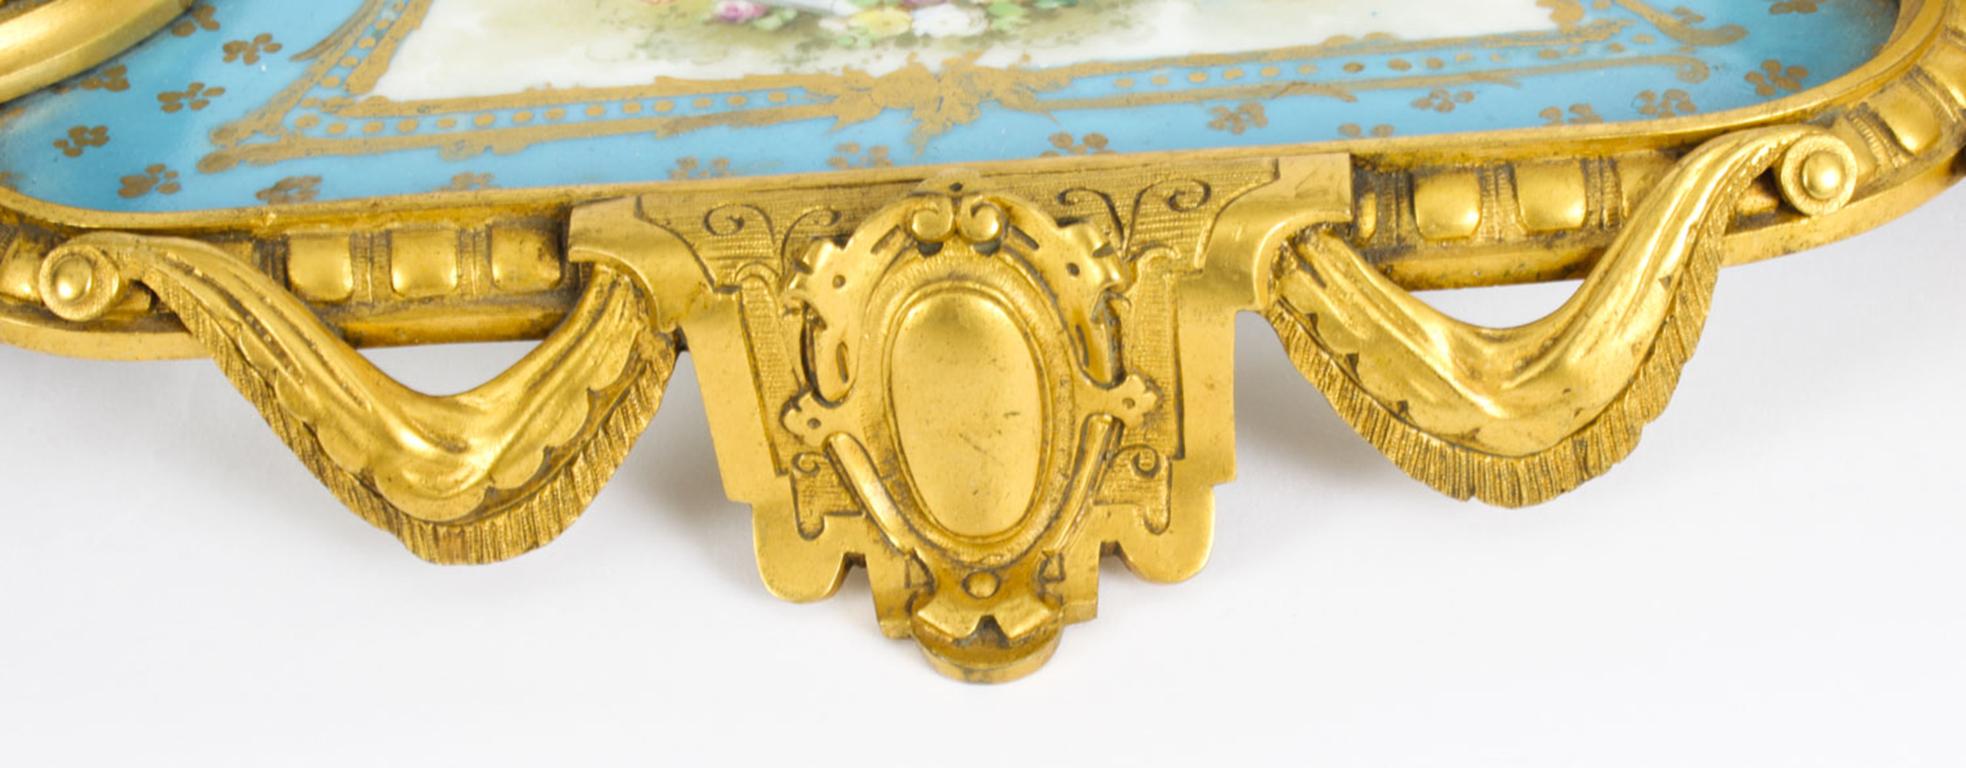 Antique French Ormolu and Sèvres Porcelain Standish Inkstand, 19th Century 2